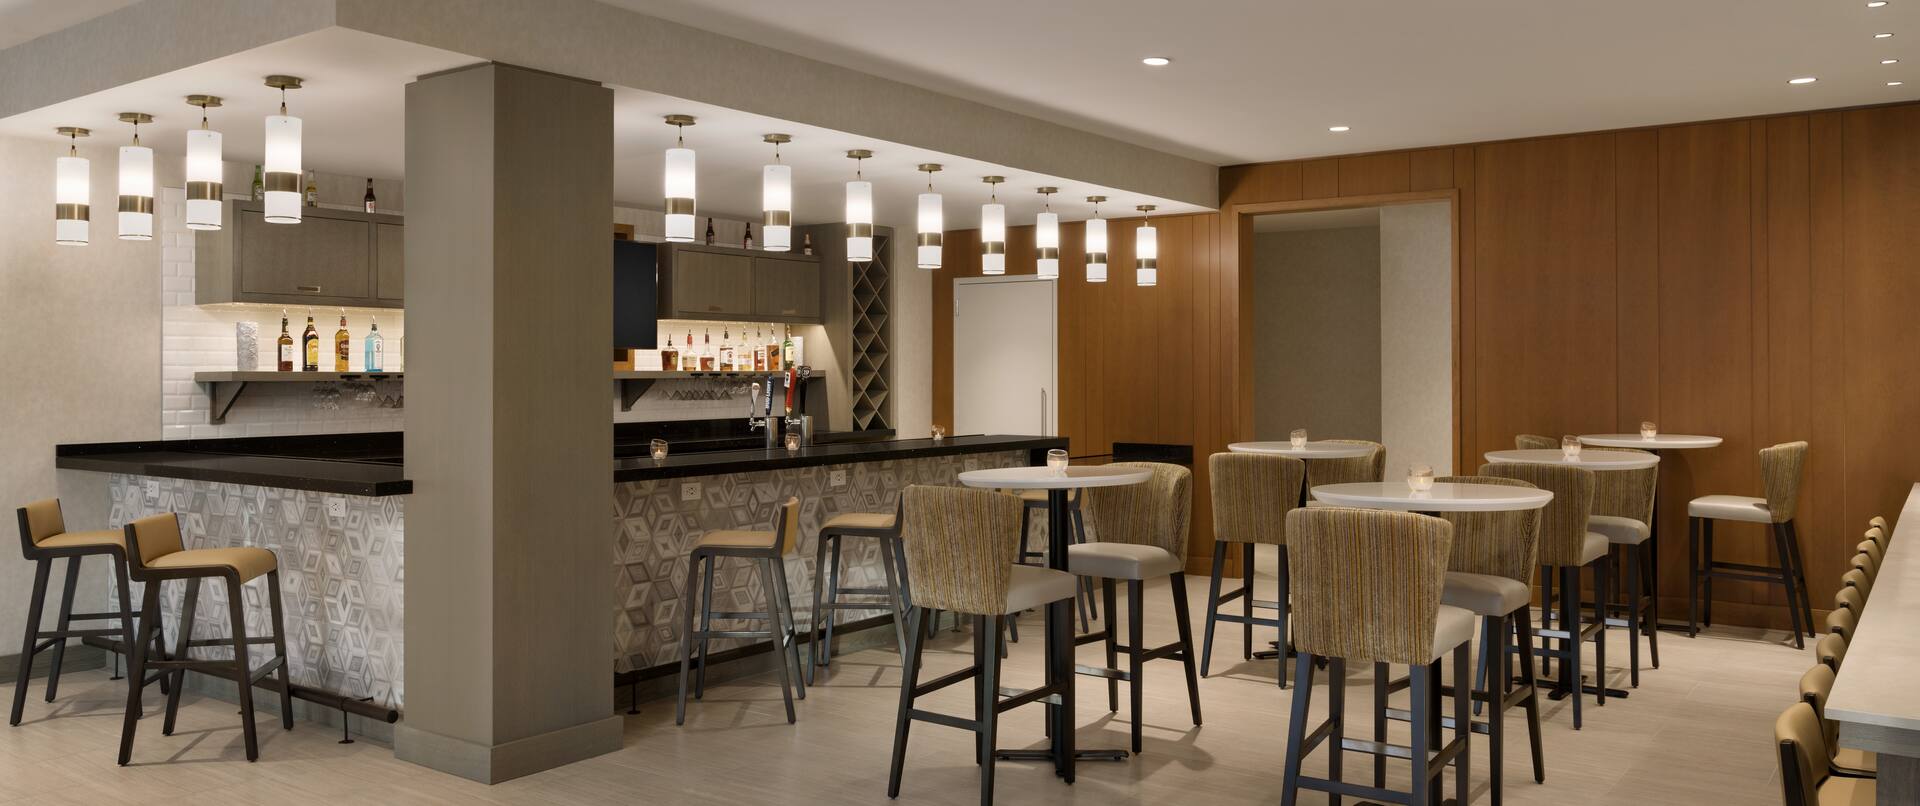 Bar Lounge Area with Bar Counter and Bar Stools